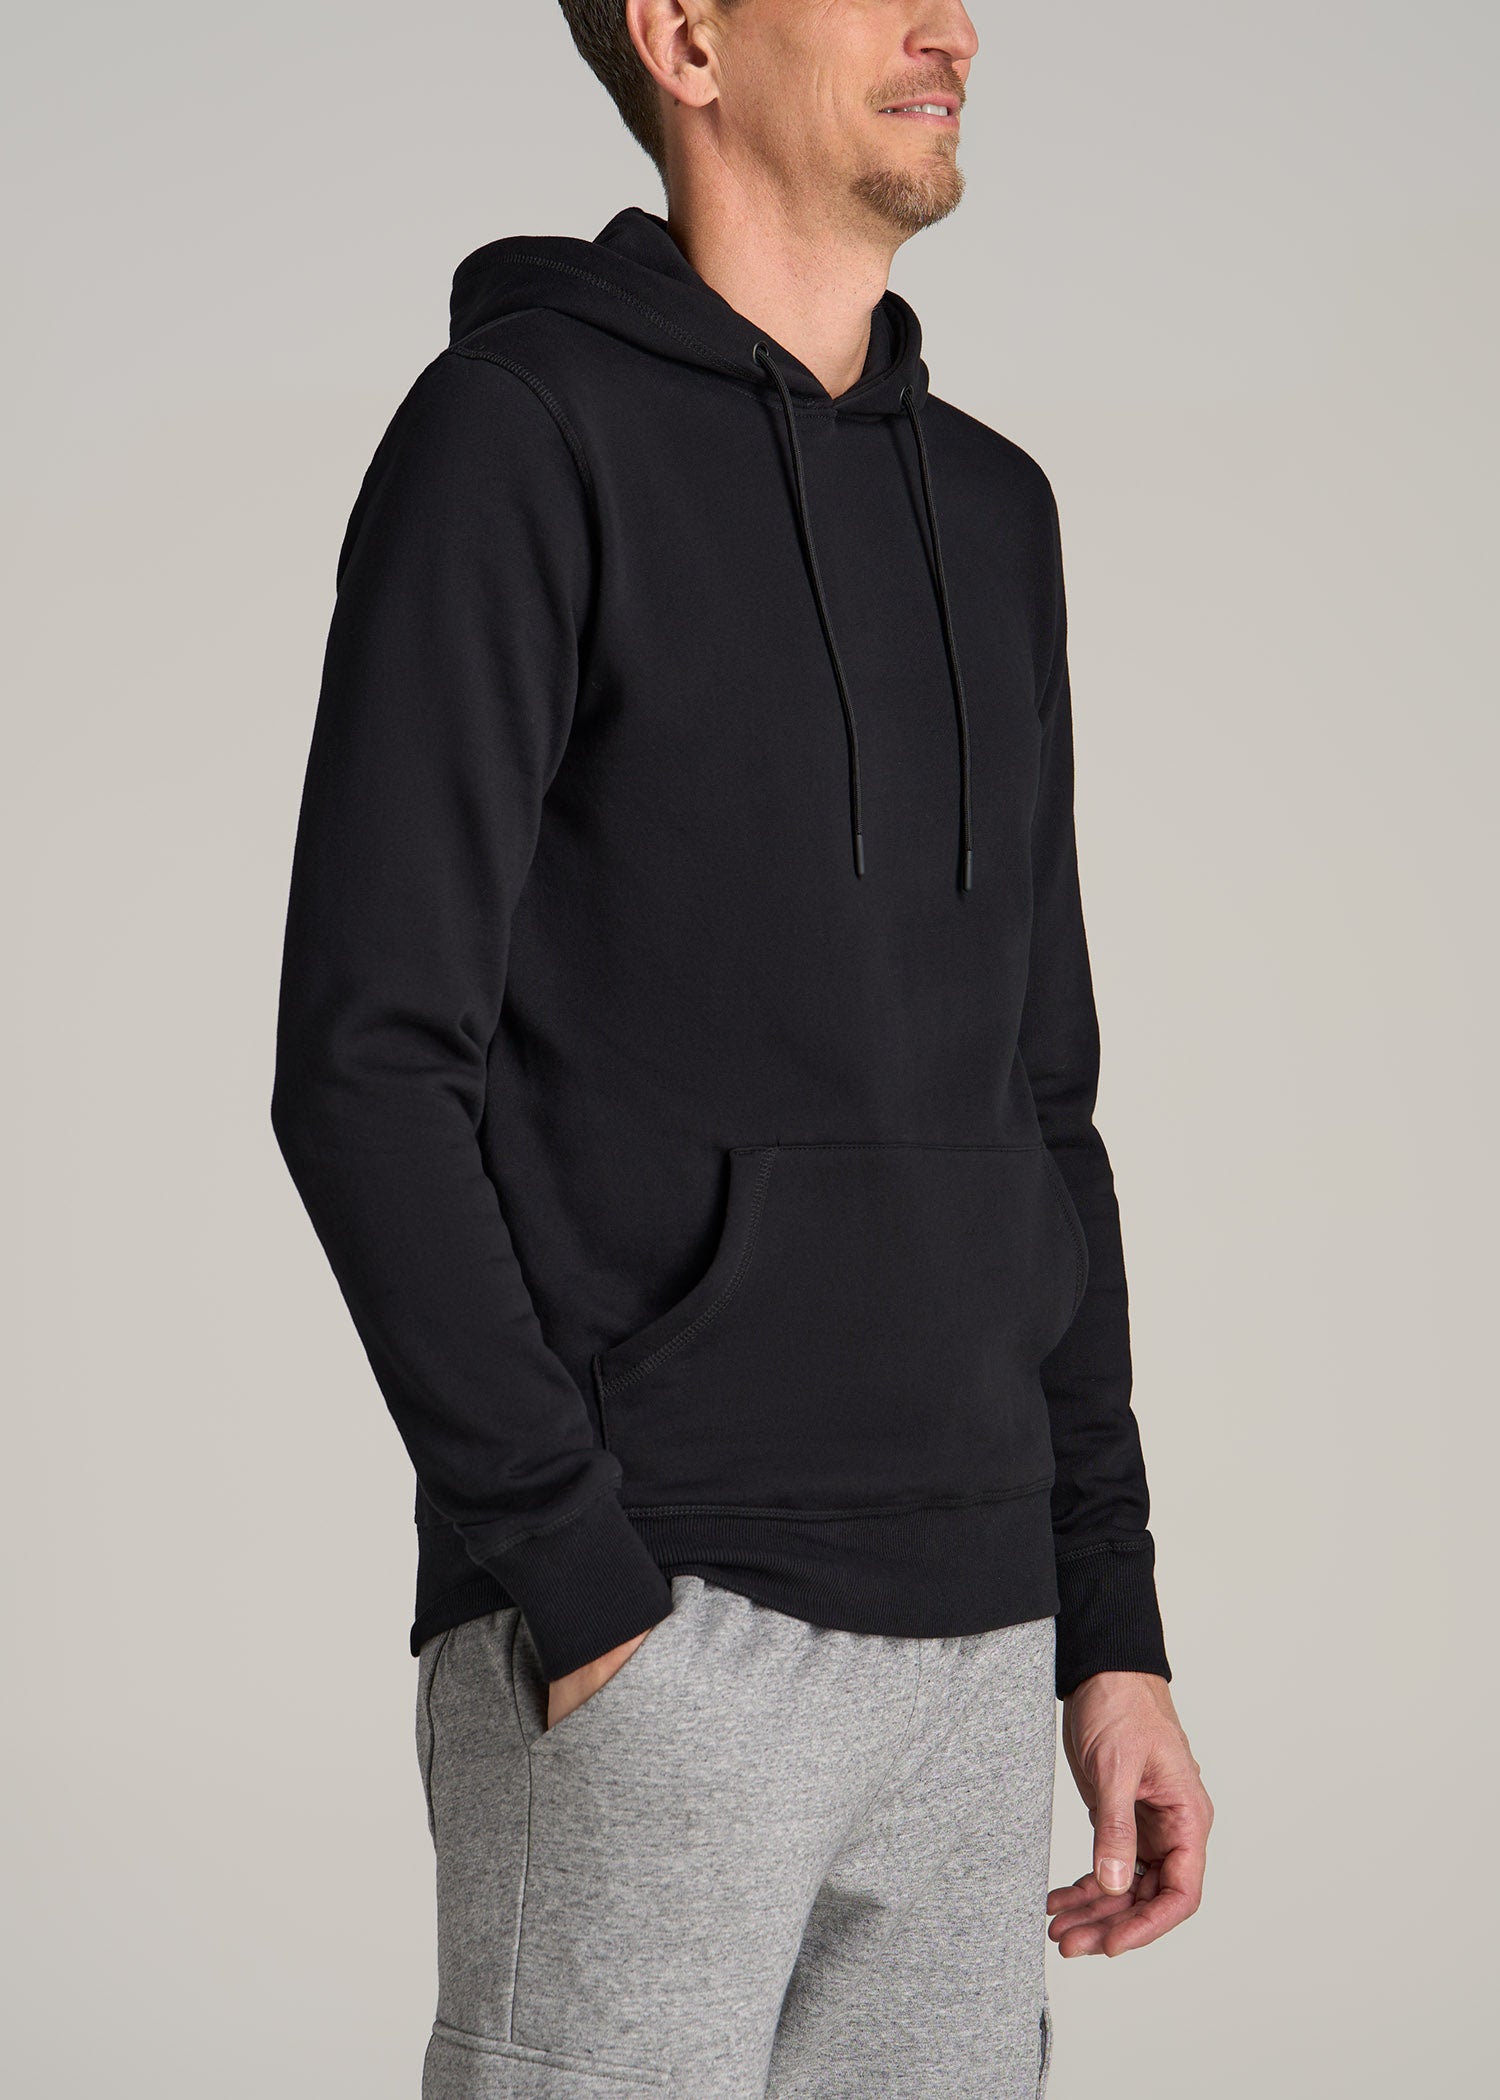 Hoodies for Tall Men: Pullover Tall Black Hoodie